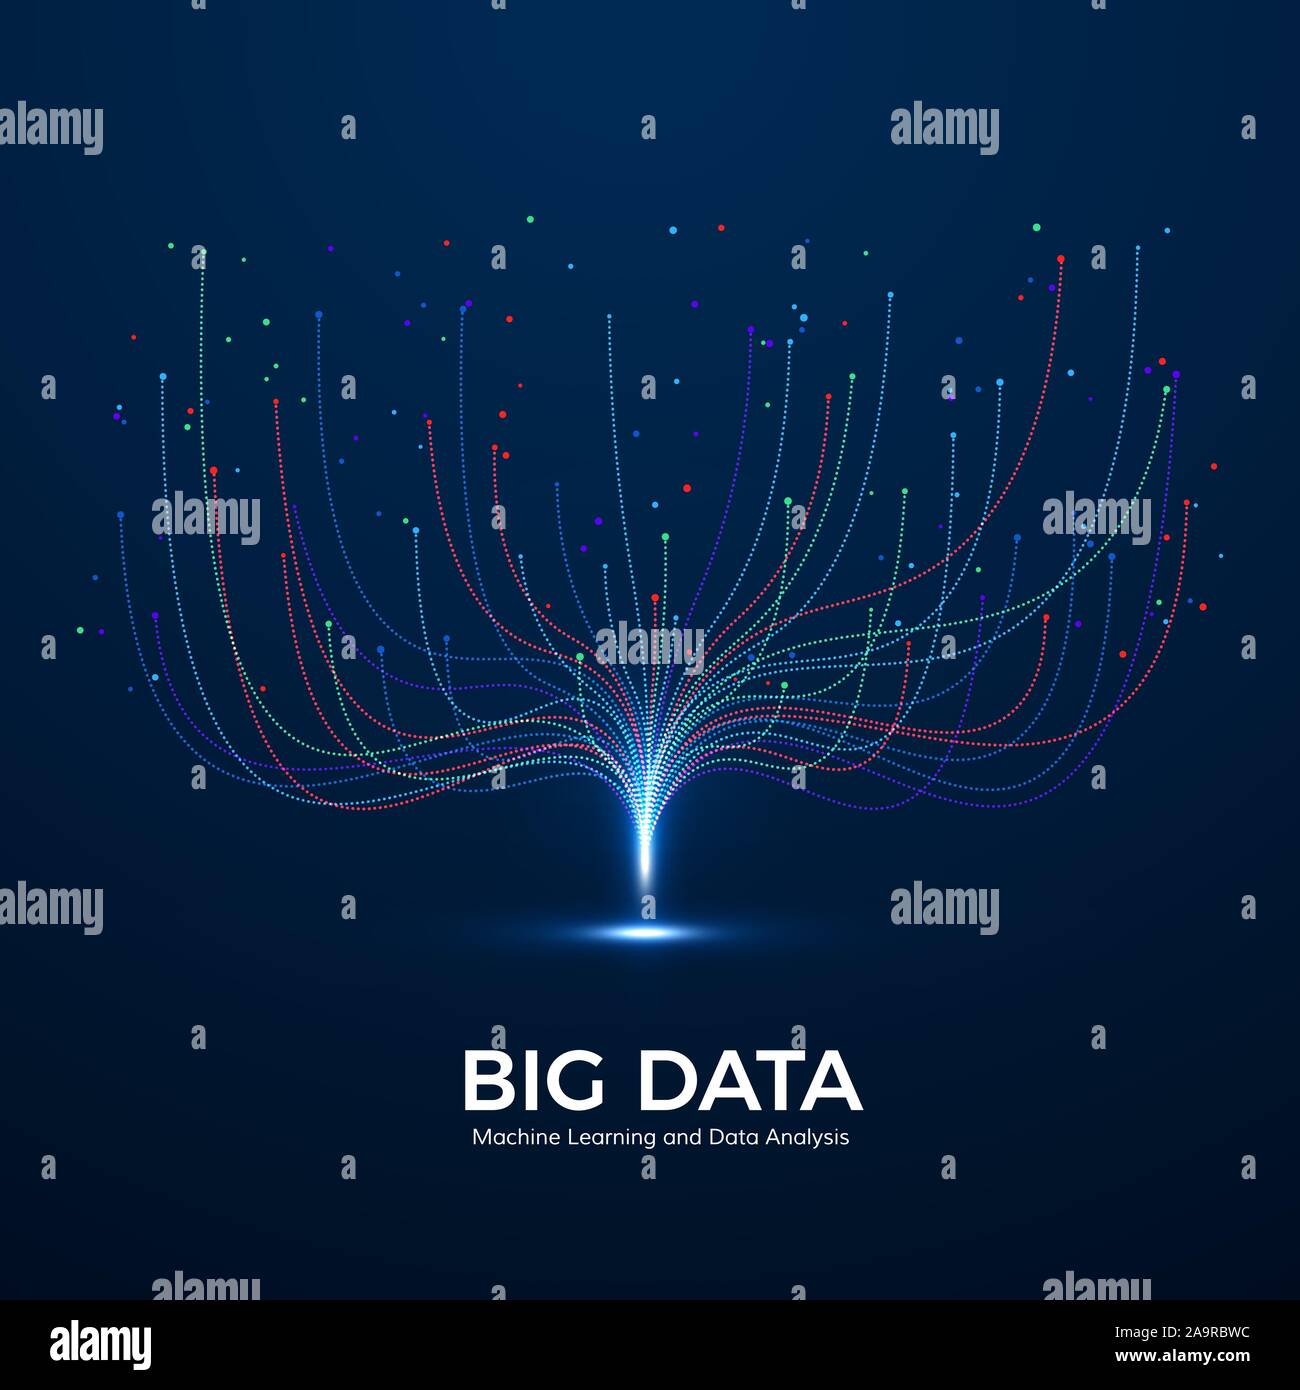 Big Data Machine Learning and Data Analysis. Digital Technology Visualization. Dot and Connection Lines. Data Flow Analyze and Processing Information. Stock Vector